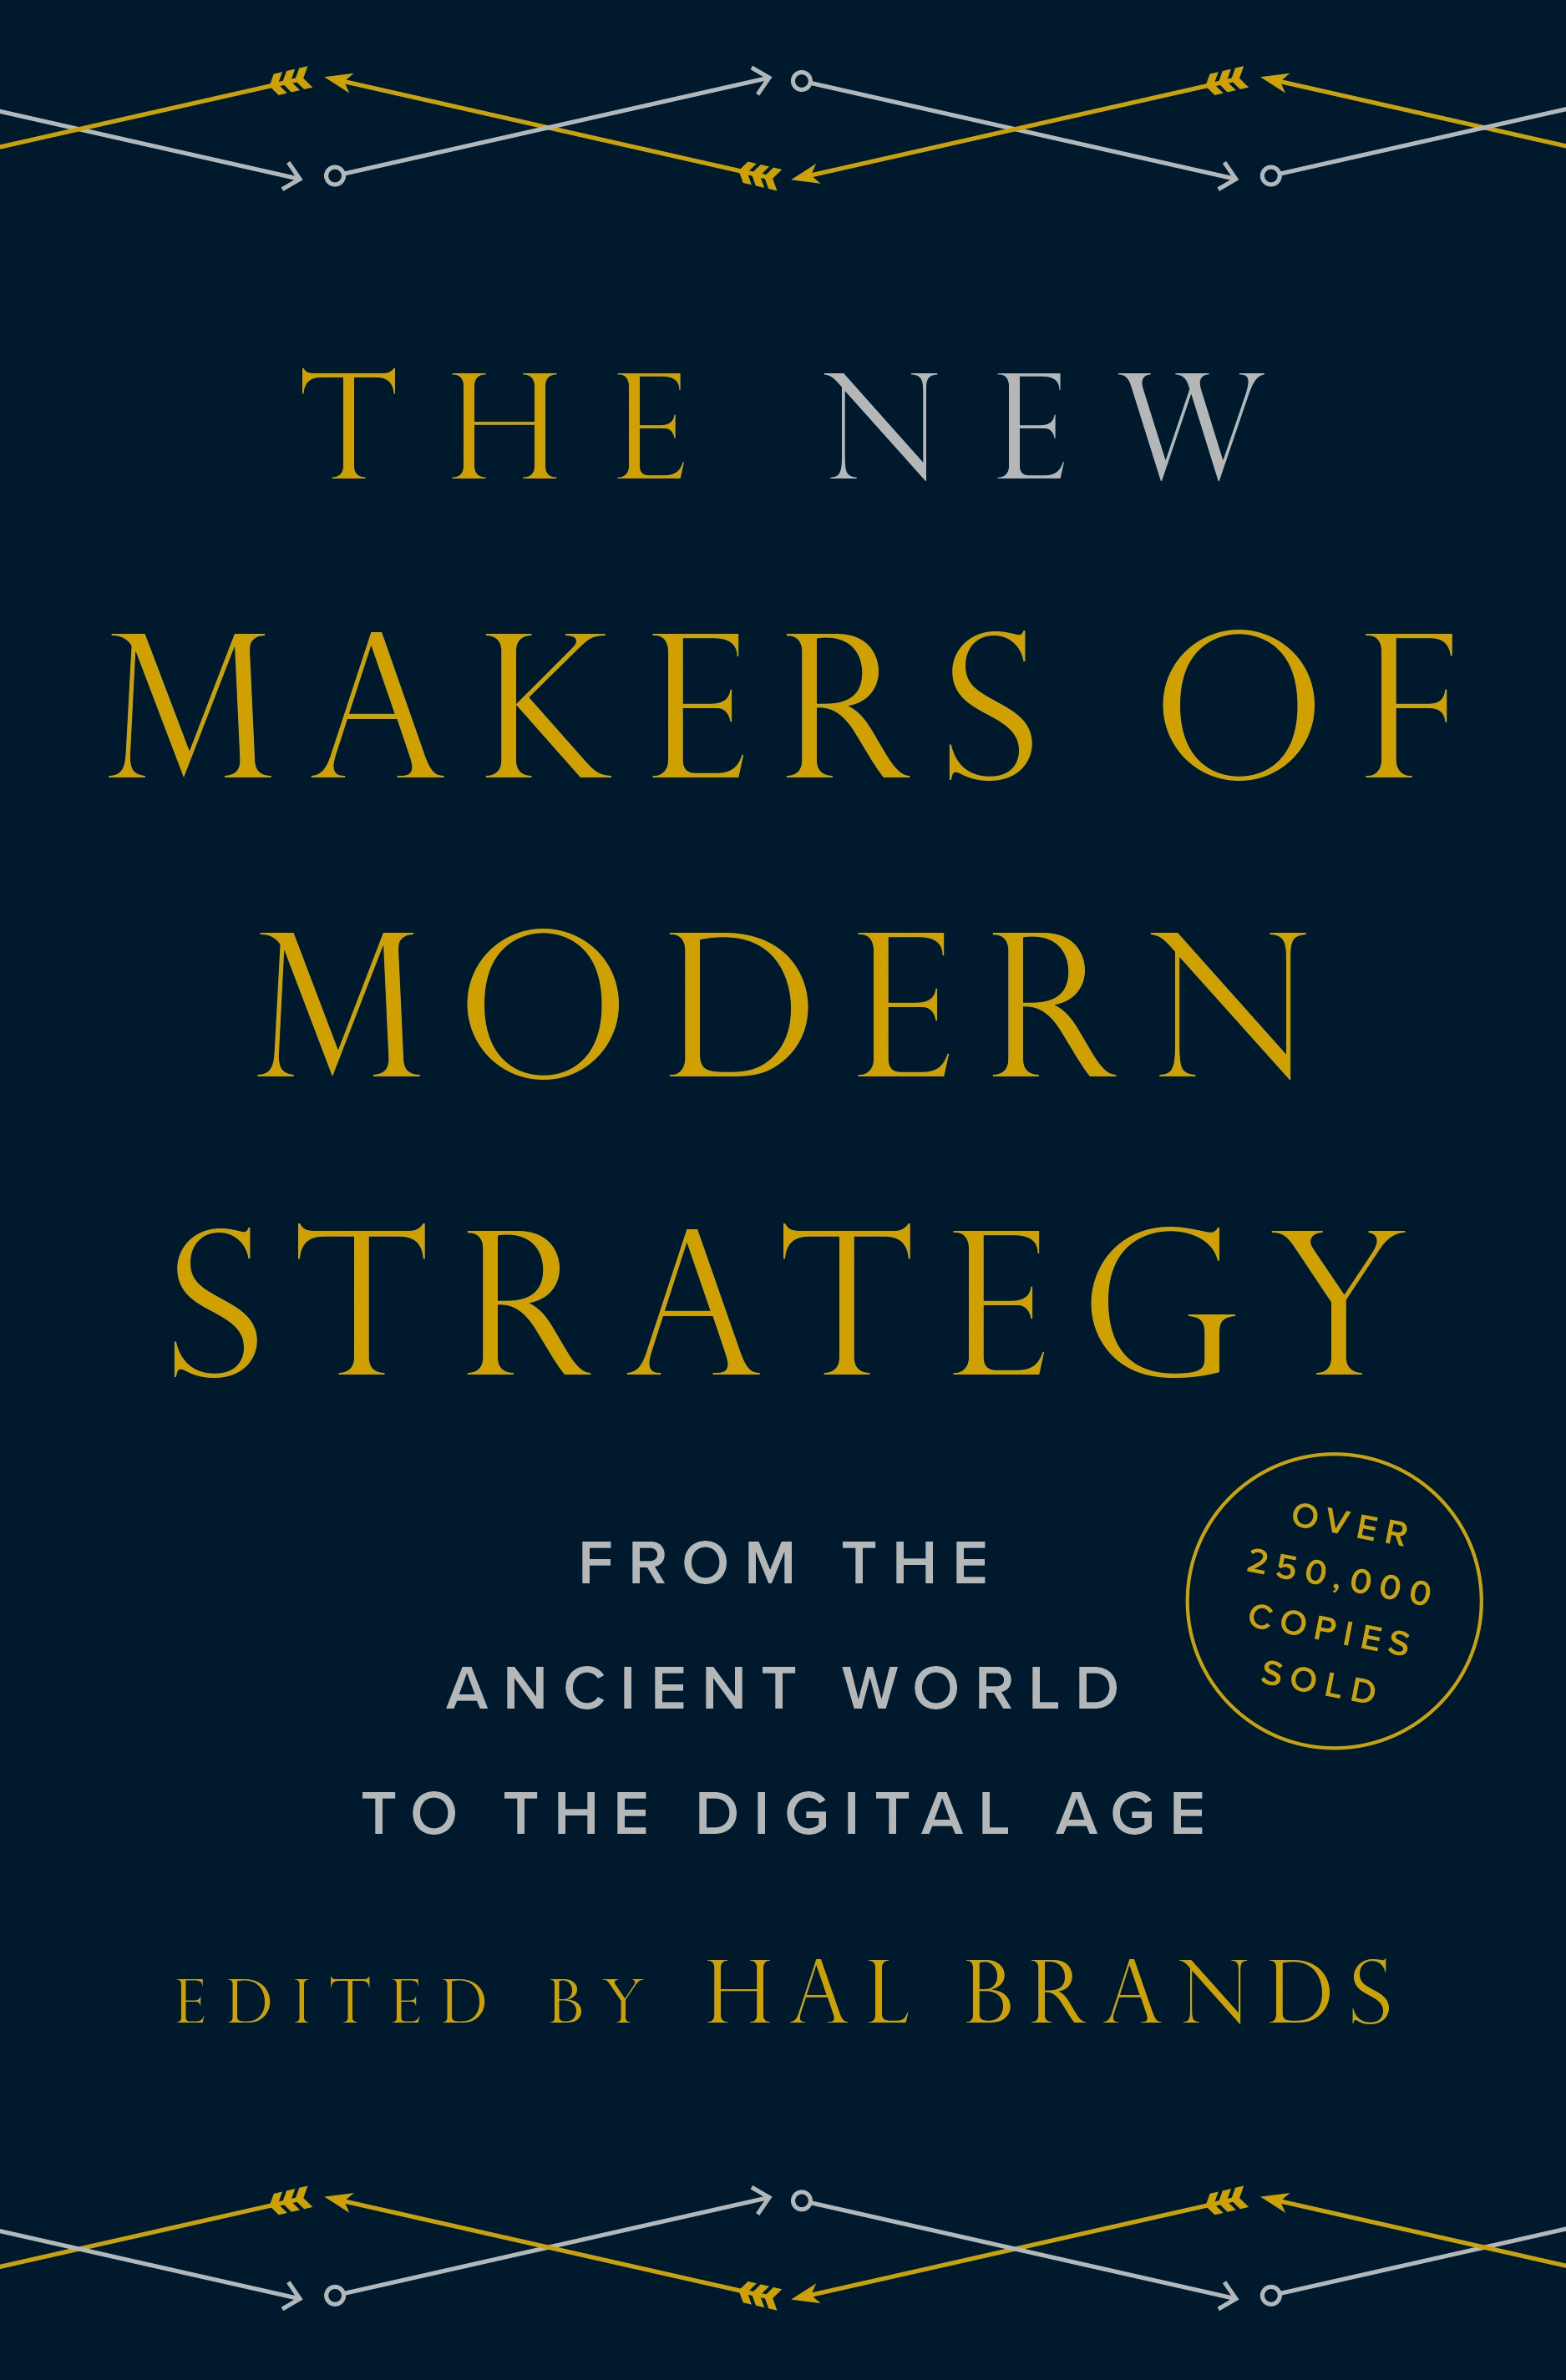  The new makers of modern strategy